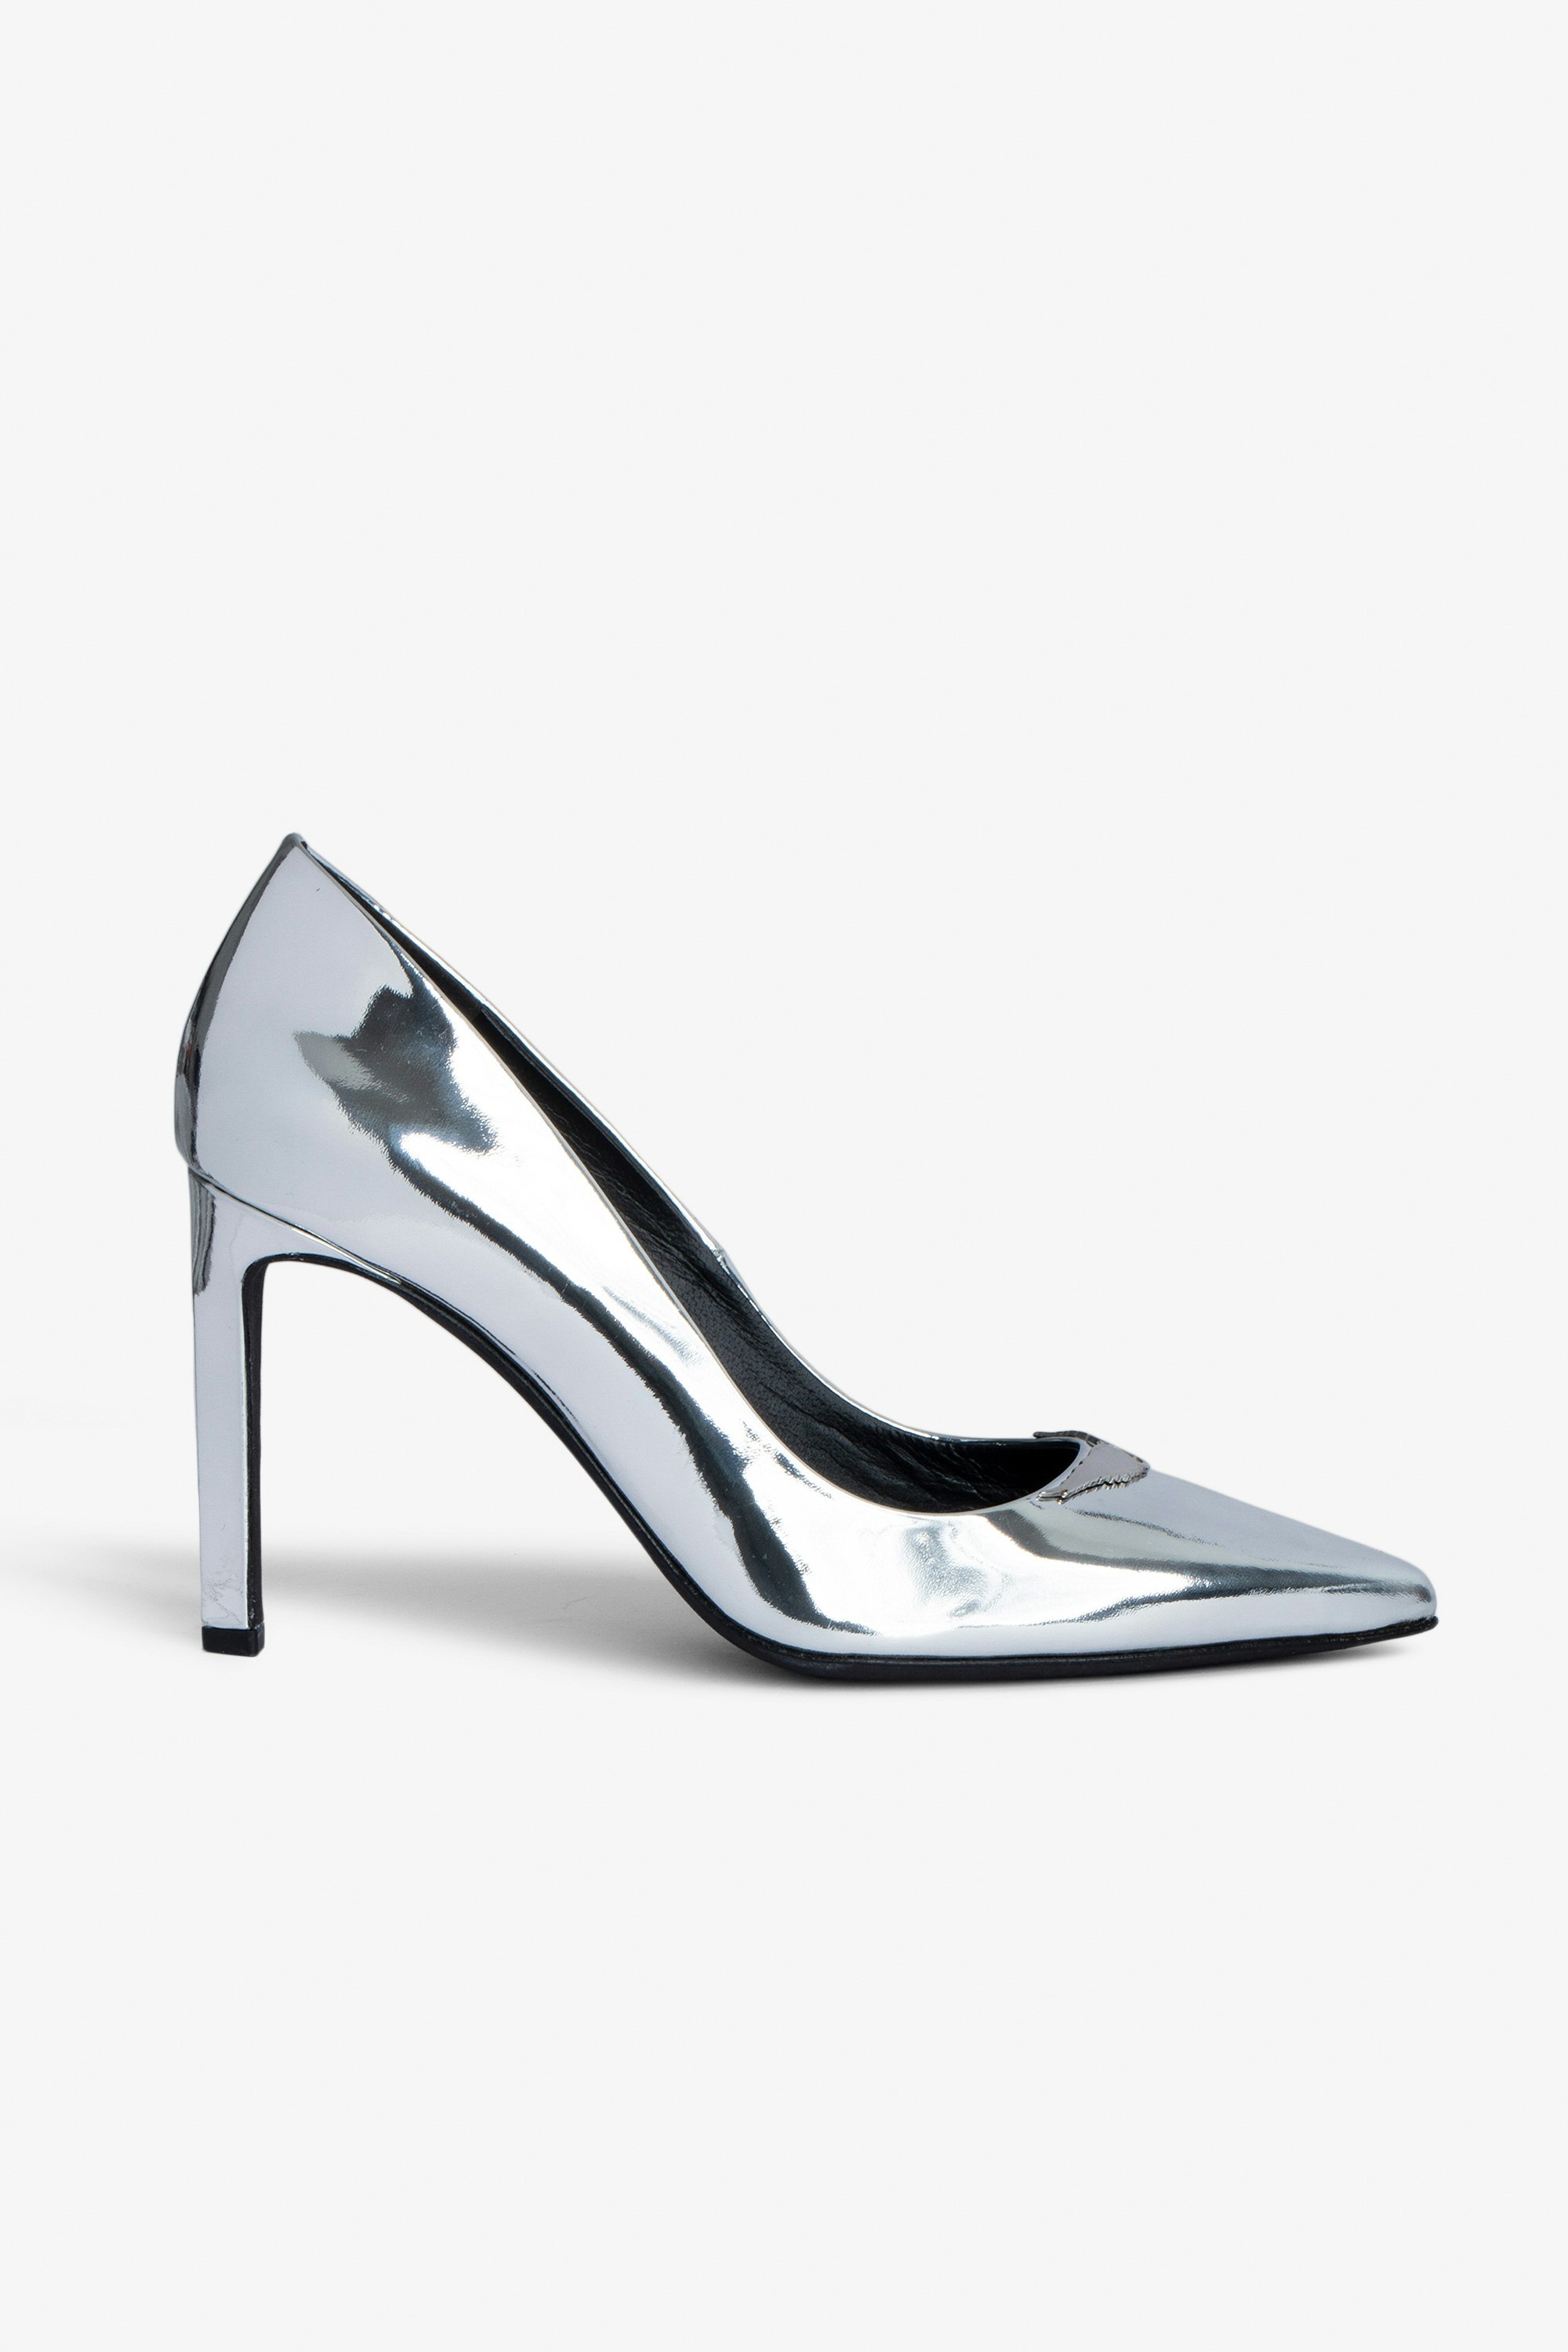 Perfect Court Shoes - Silver patent leather court shoes with mirror wings charm.